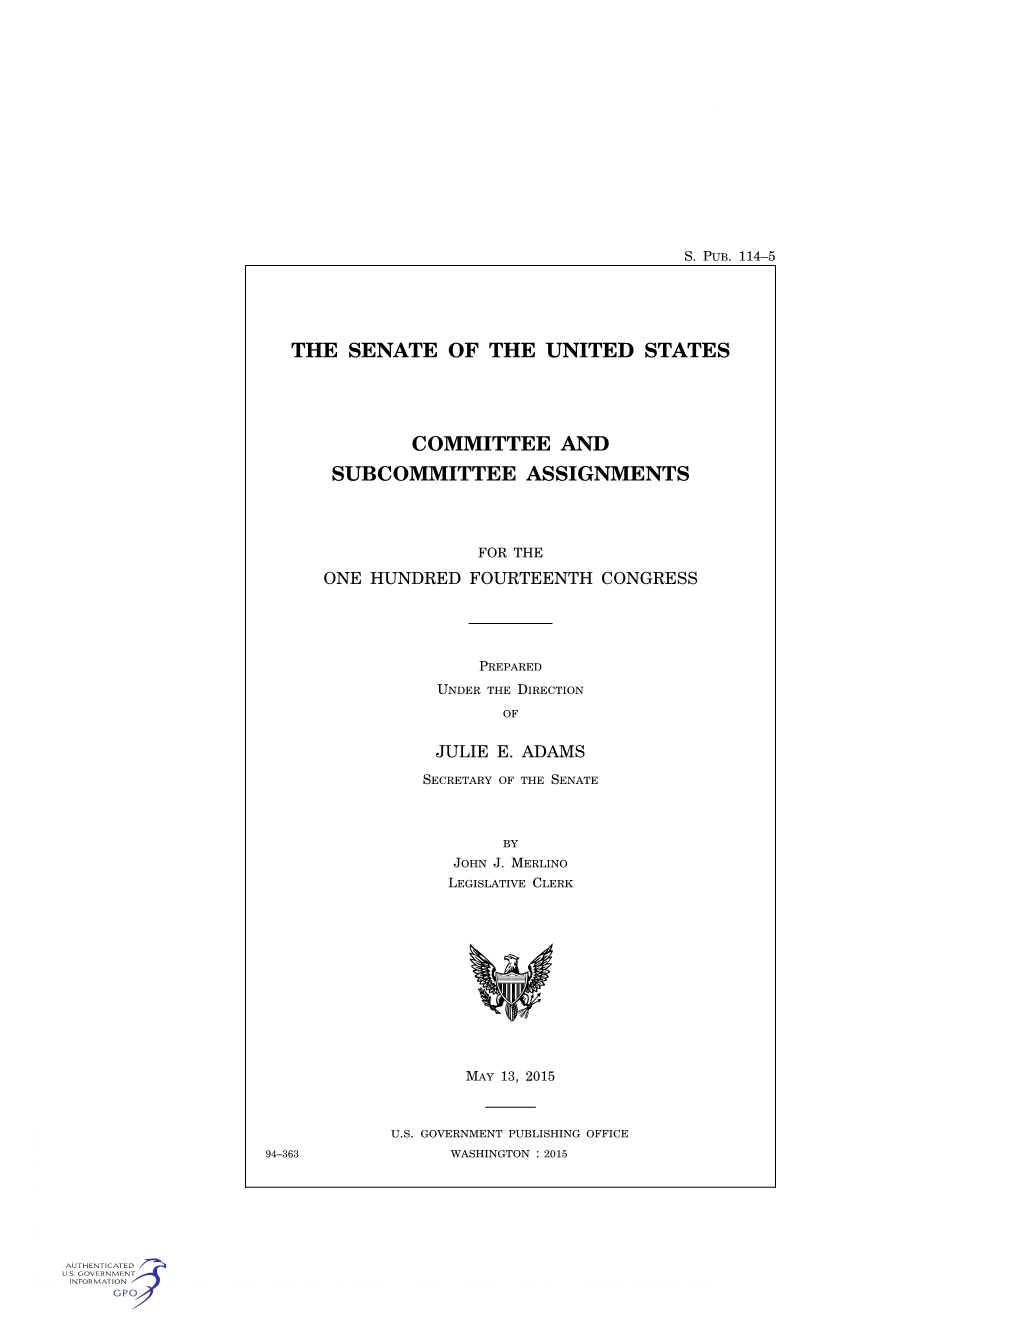 The Senate of the United States Committee And